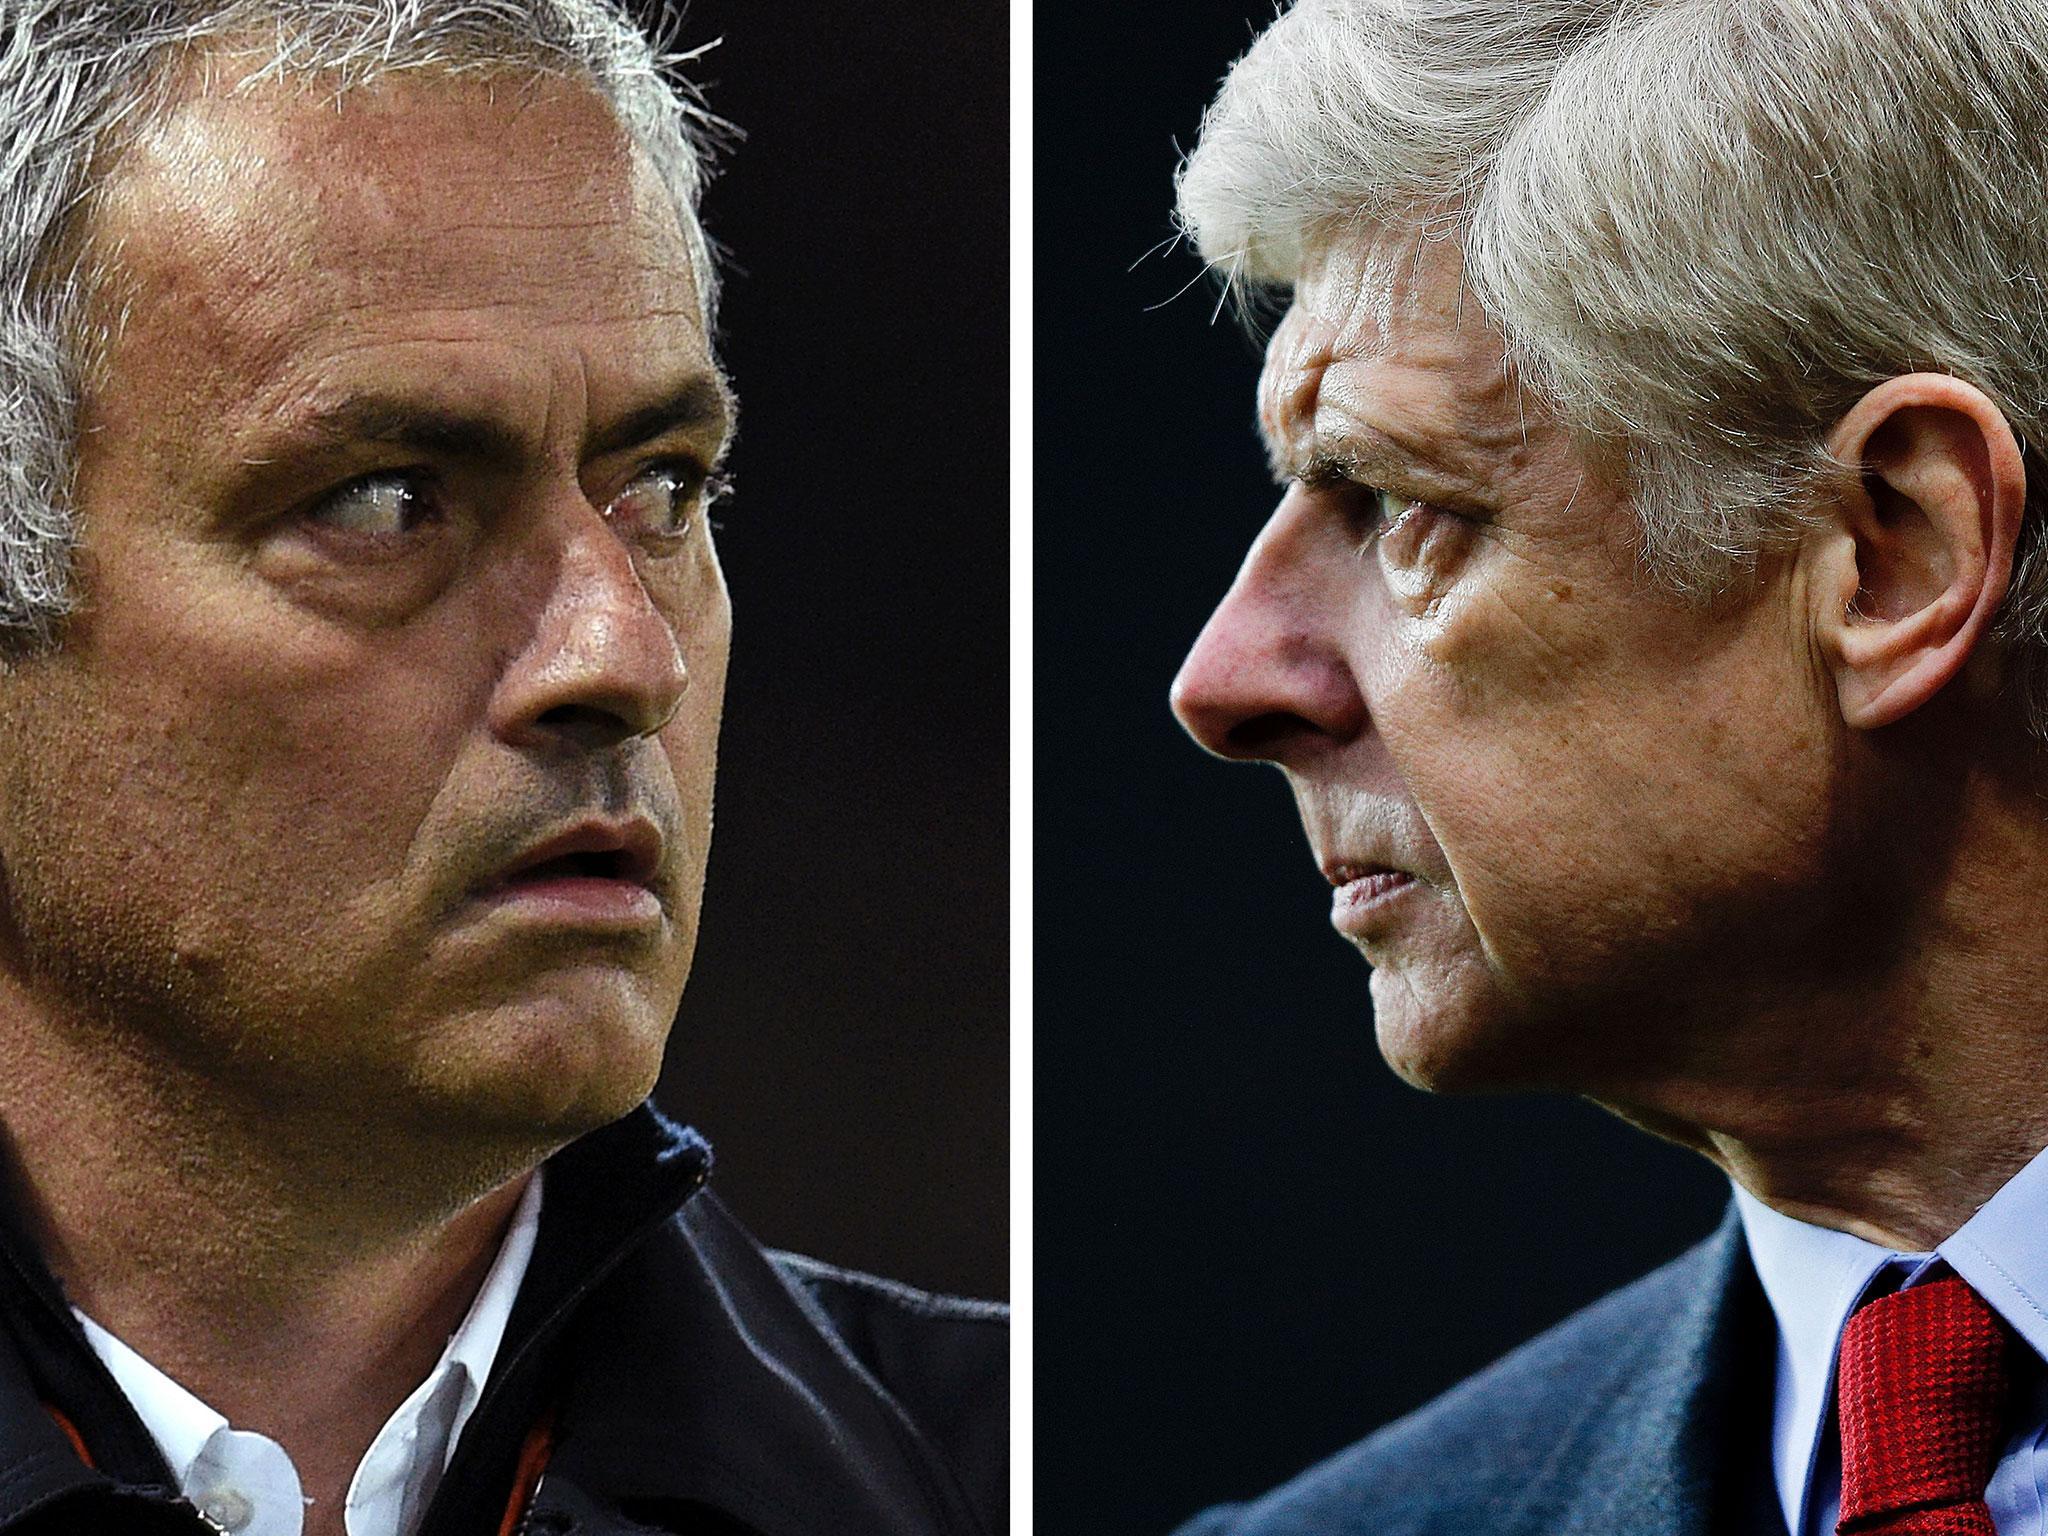 Jose Mourinho and Arsene Wenger will meet again this weekend